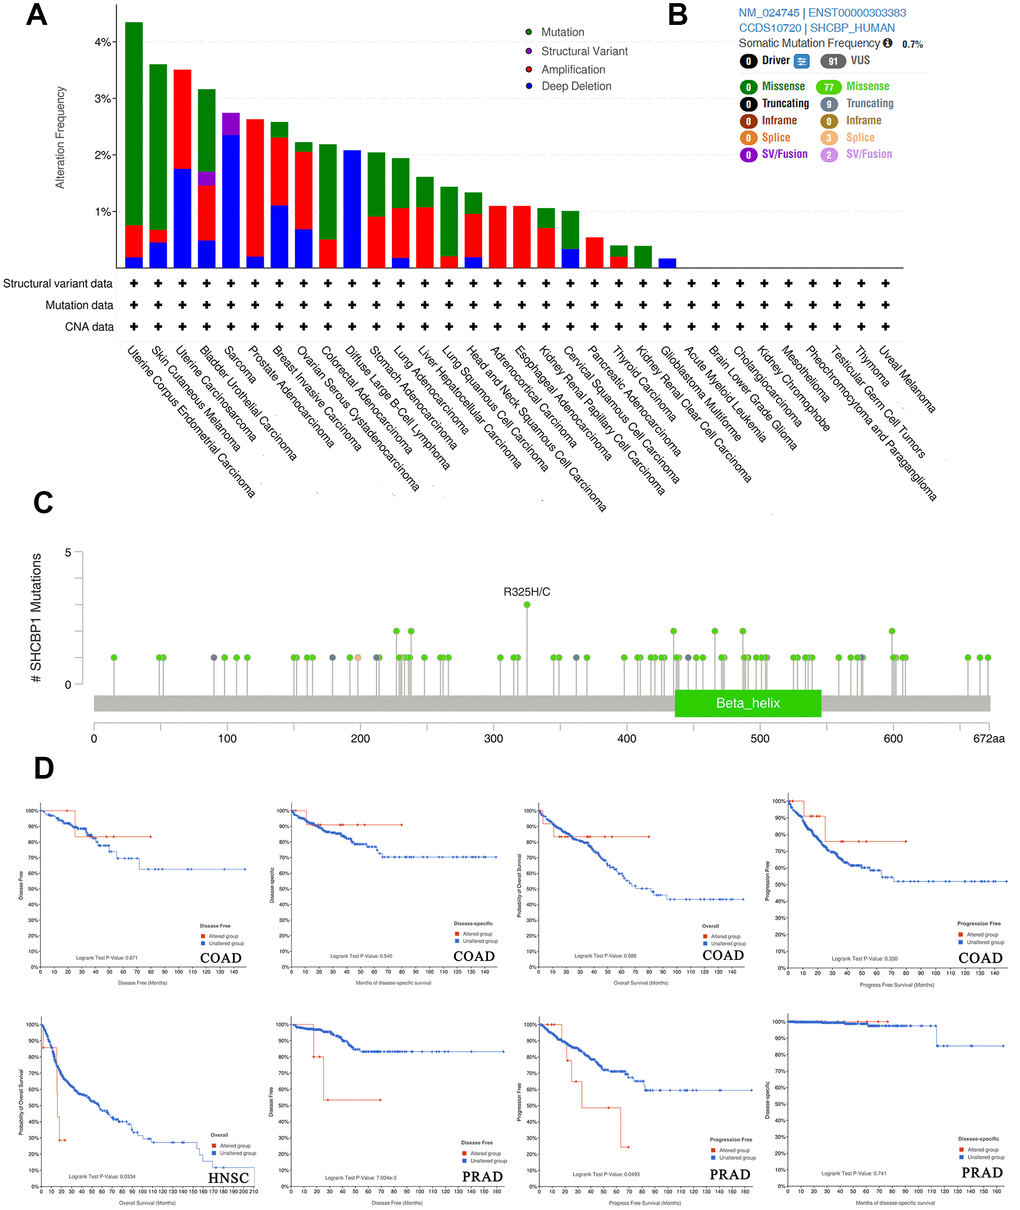 Analysis of SHCBP1 alteration in pan-cancer. (A) The histogram showed alteration frequency of SHCBP1 mutation types in cBioPortal database. (B) Summary of structural variation, mutations and copy number alterations of SHCBP1. (C) The mutation site with the highest alteration frequency (R325H/C) in SHCBP1. (D) The correlation between alteration status and prognosis in COAD, HNSC and PRAD patients.